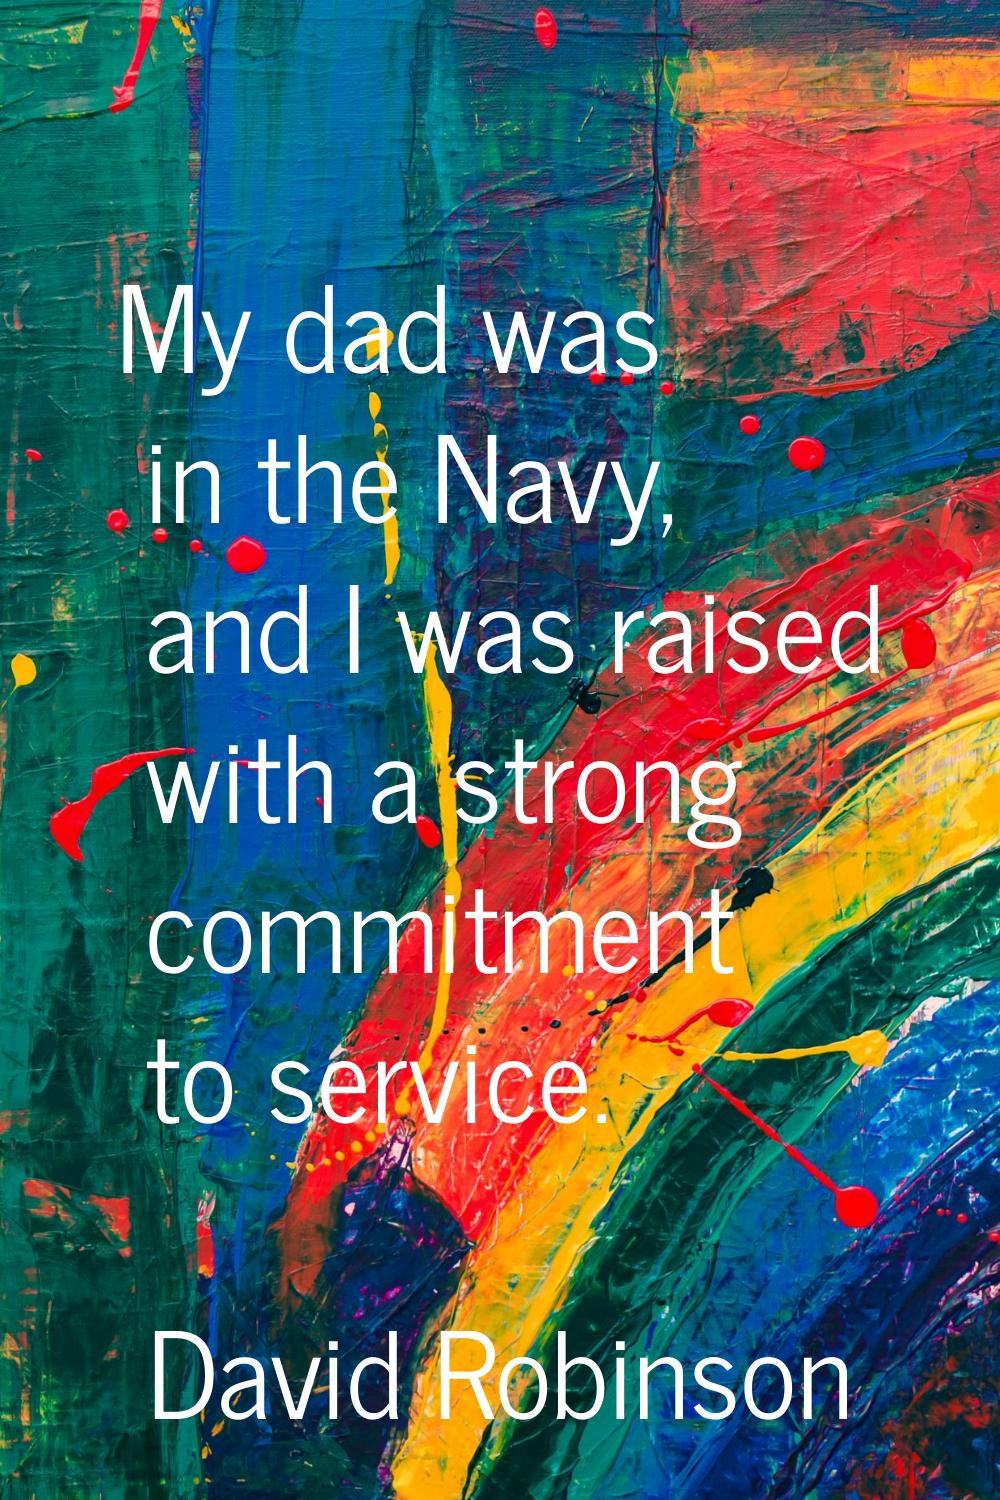 My dad was in the Navy, and I was raised with a strong commitment to service.